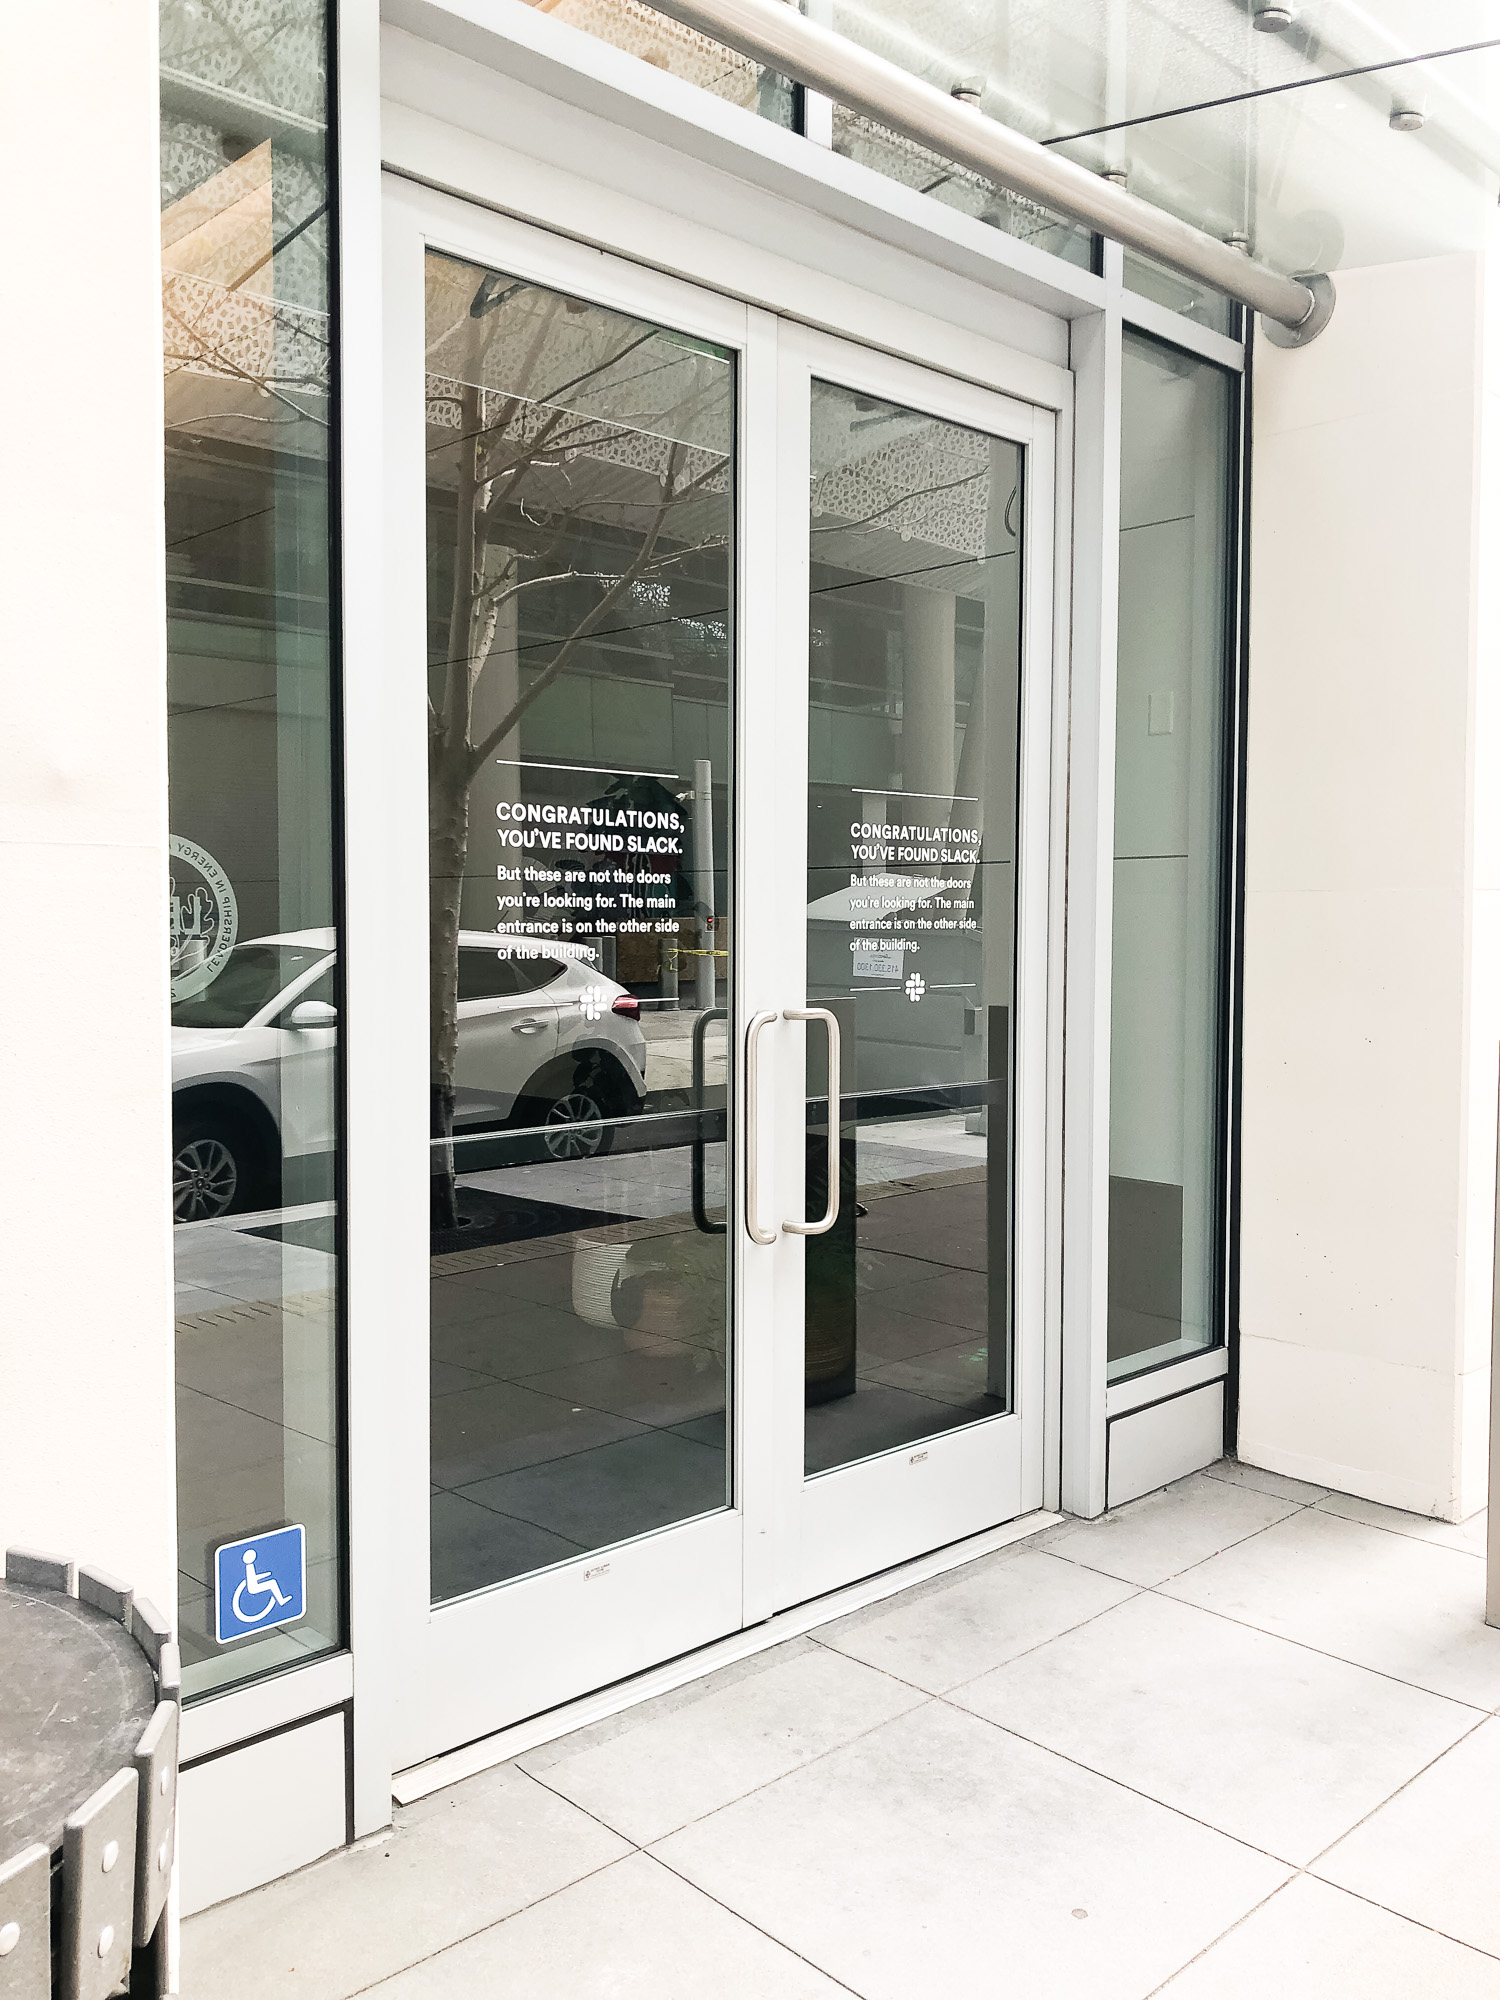 Matte white vinyl wayfinding sign with white text on glass doors for the San Francisco office of Slack, an American cloud-based set of proprietary team collaboration tools and services.